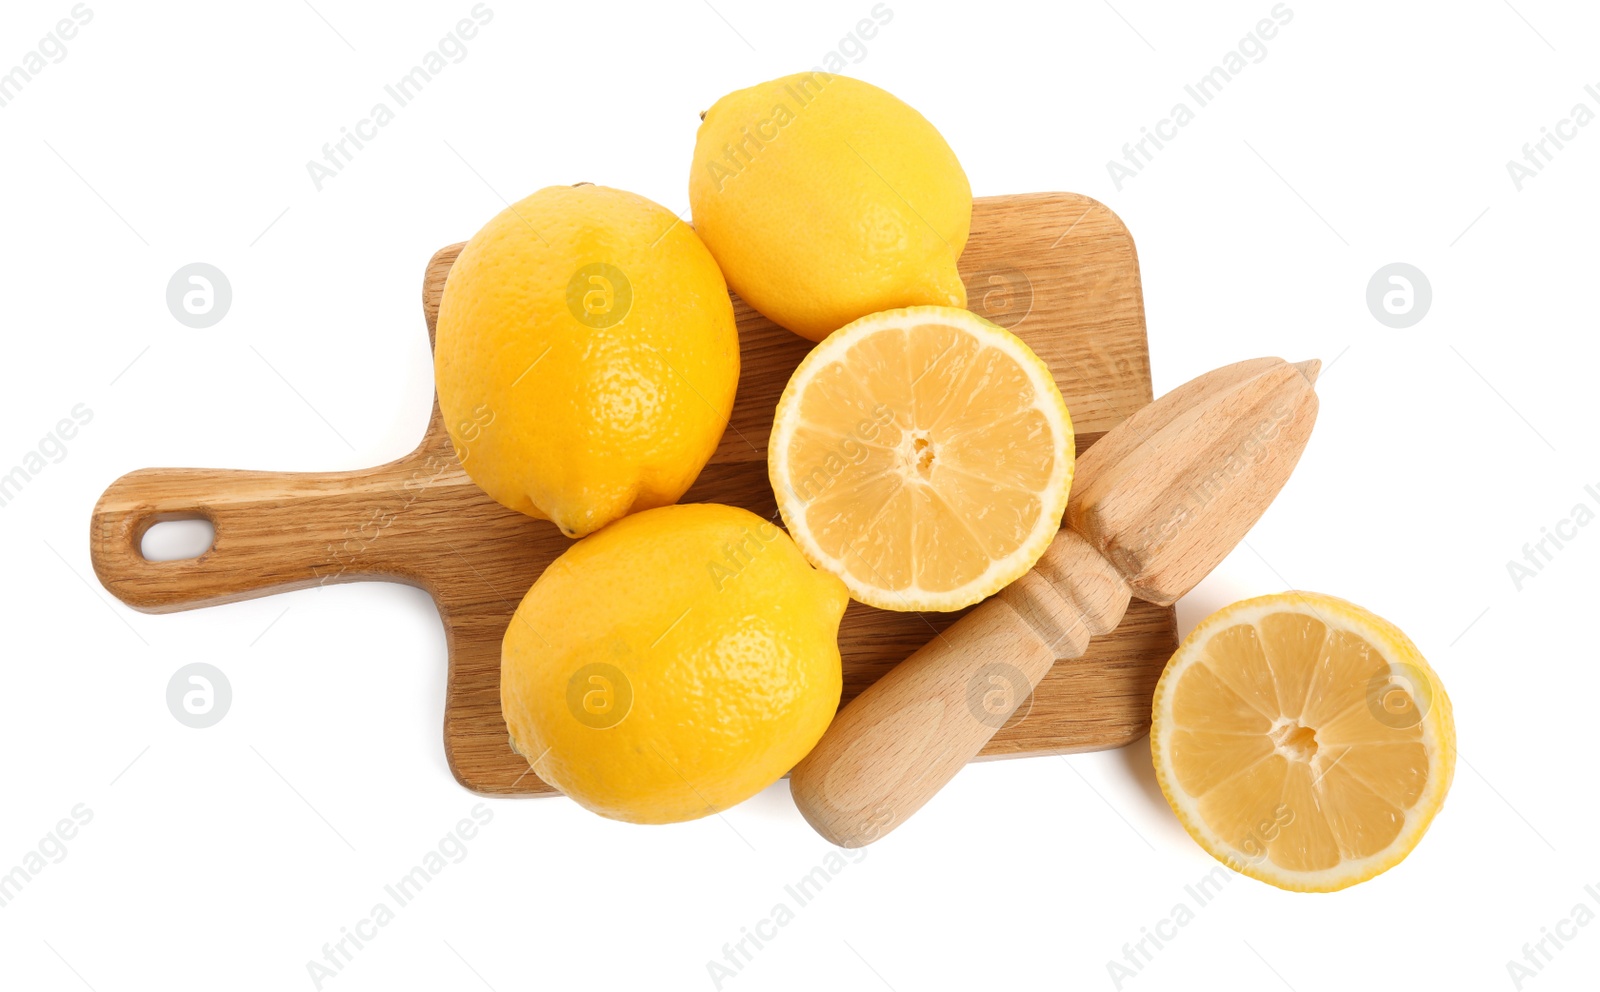 Photo of Wooden juicer and fresh lemons on white background, top view